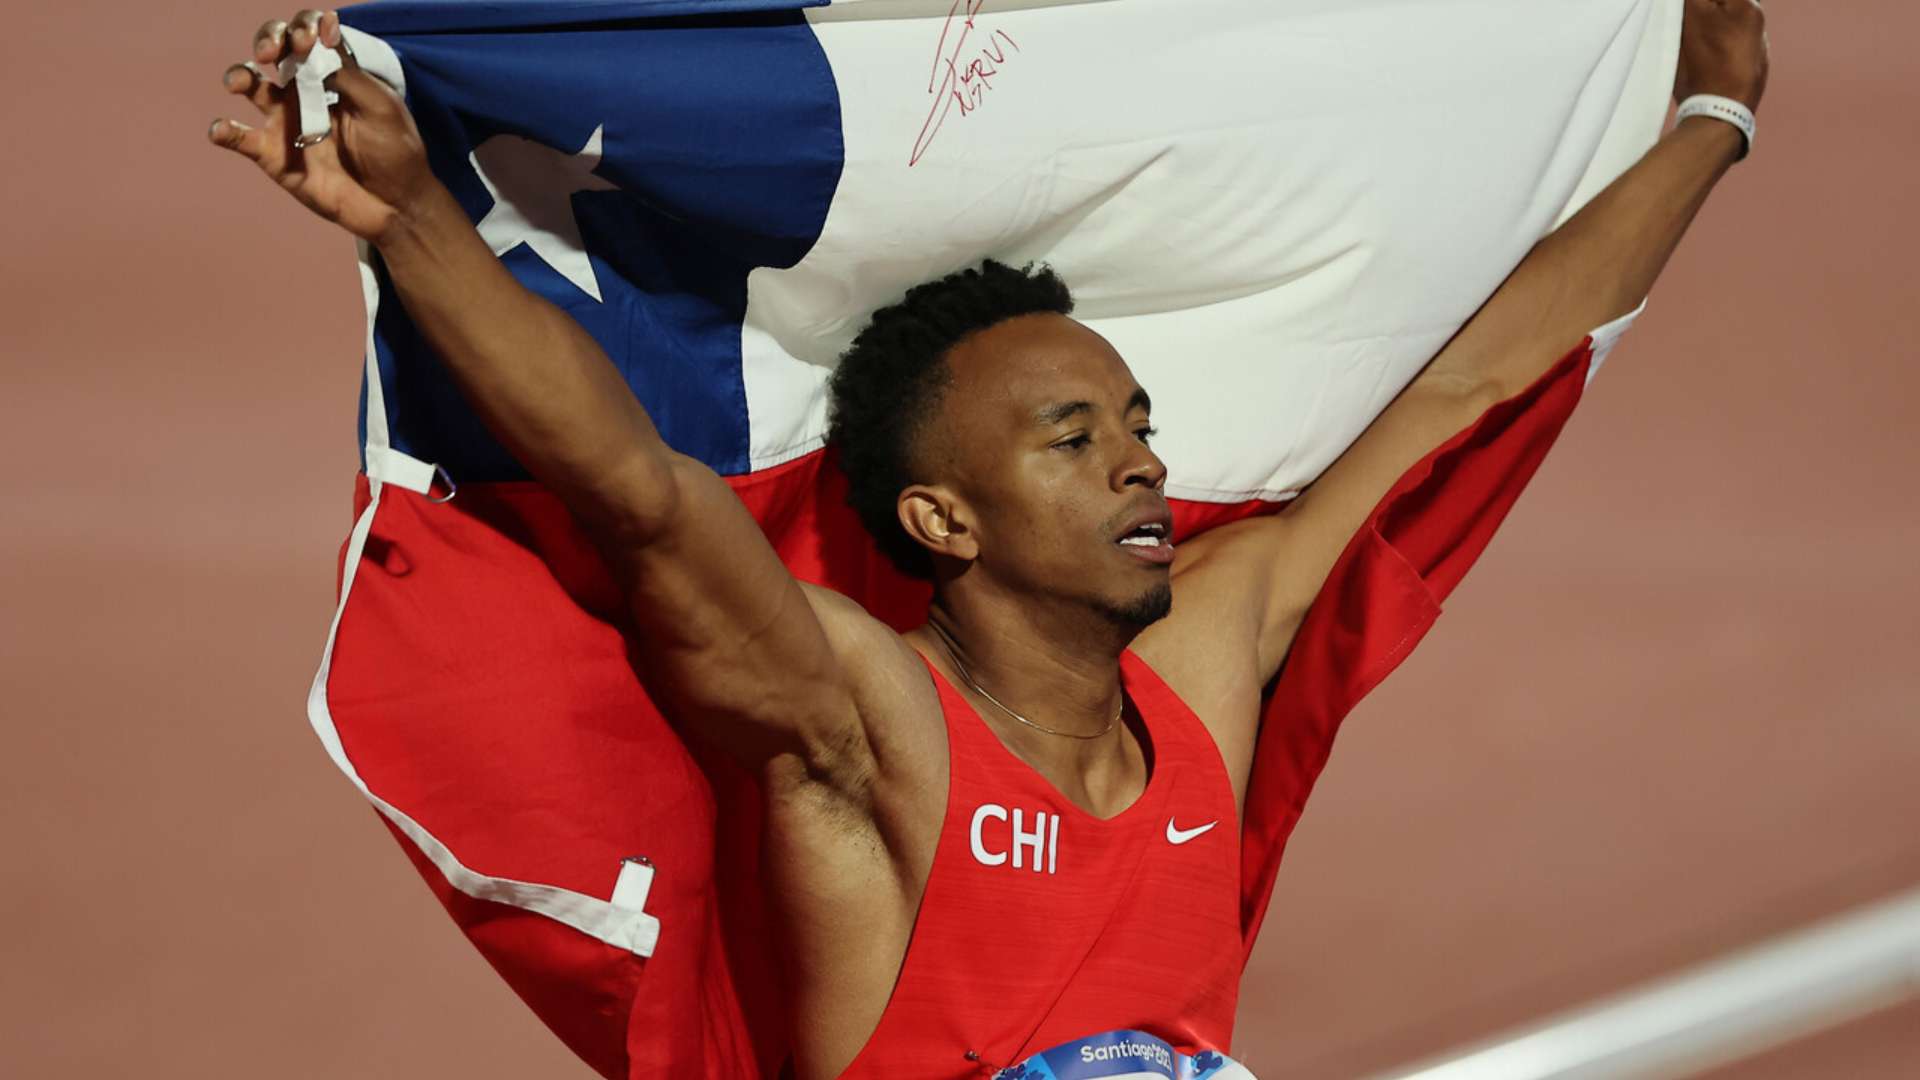 Santiago Ford gives Chile an  surprising seventh gold medal